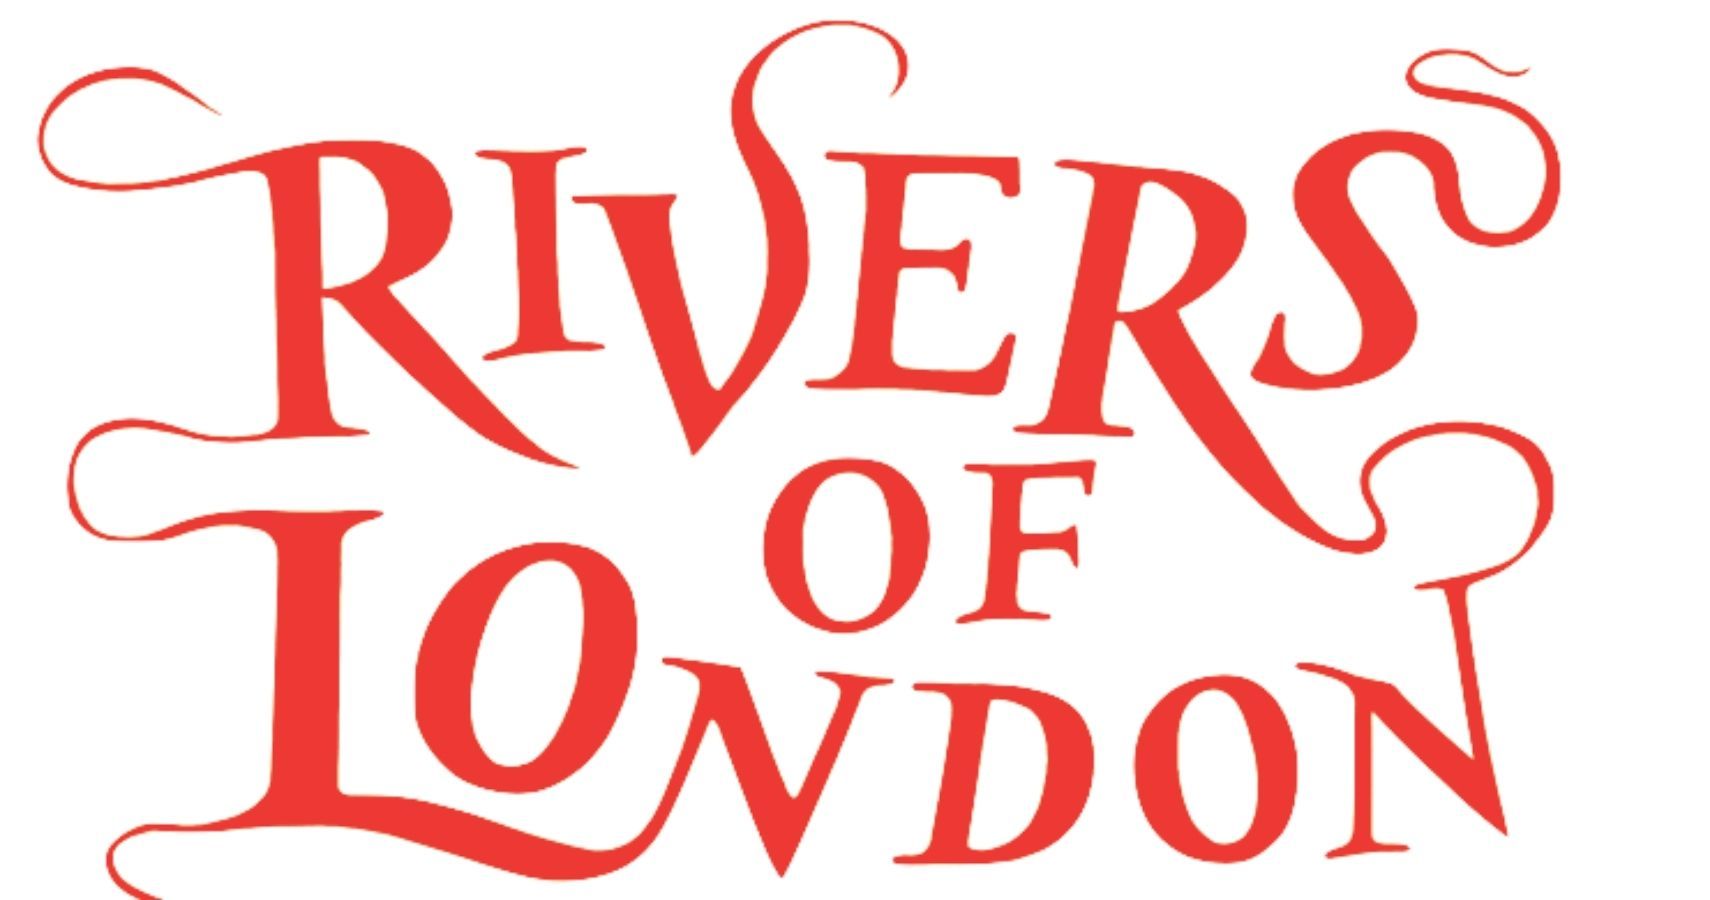 Chaosium Finalizes Creative Team For Rivers Of London RPG